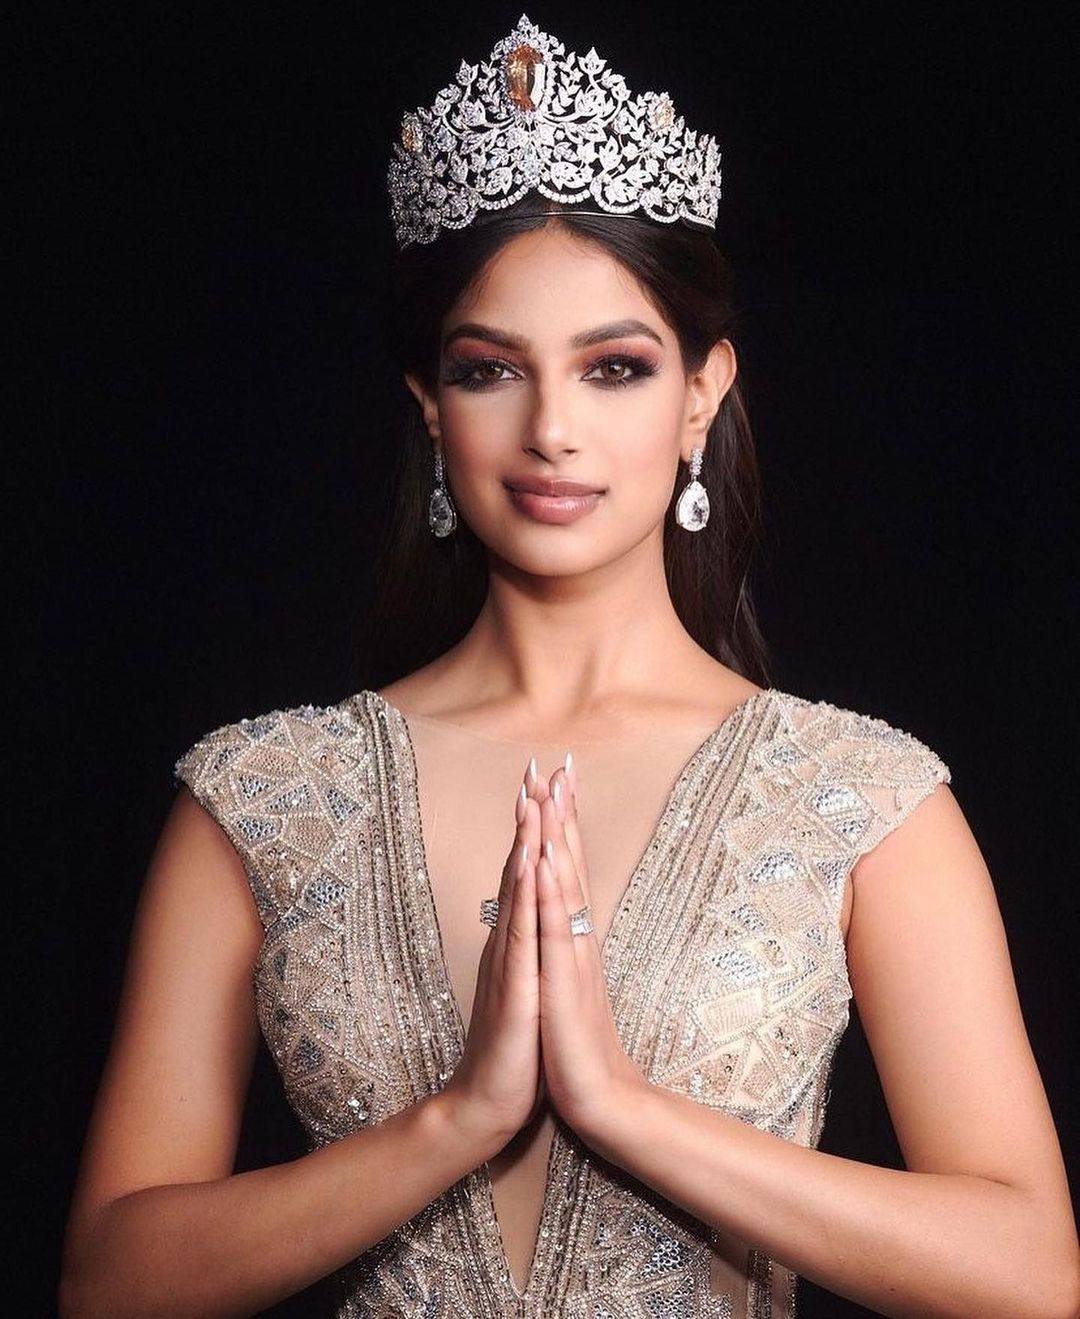 Miss World From India: List Of All The Miss Worlds From India Till